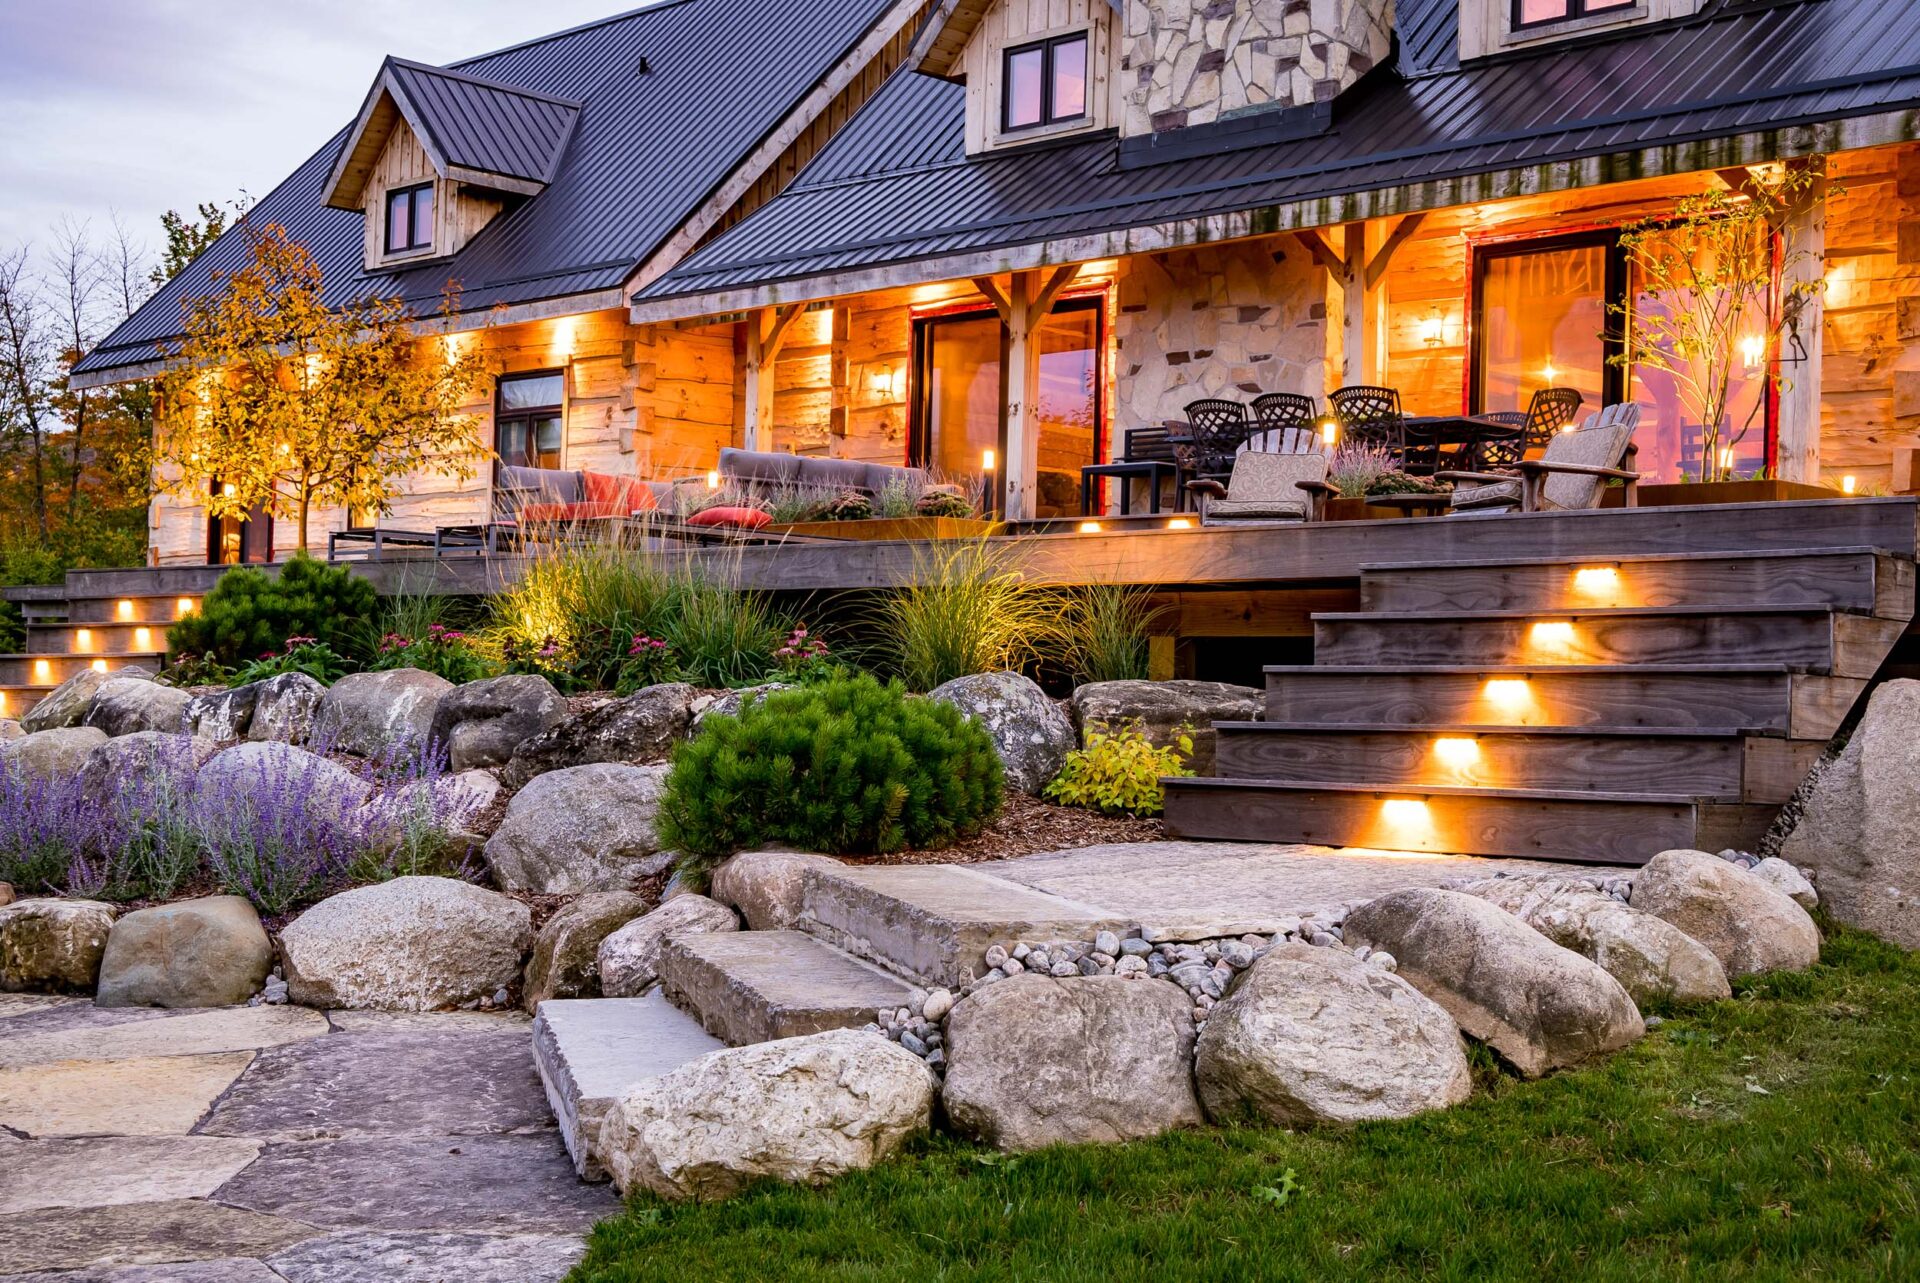 A rustic house at dusk with illuminated outdoor lighting, featuring a wooden deck, stone landscaping, and lush garden beds under a twilight sky.